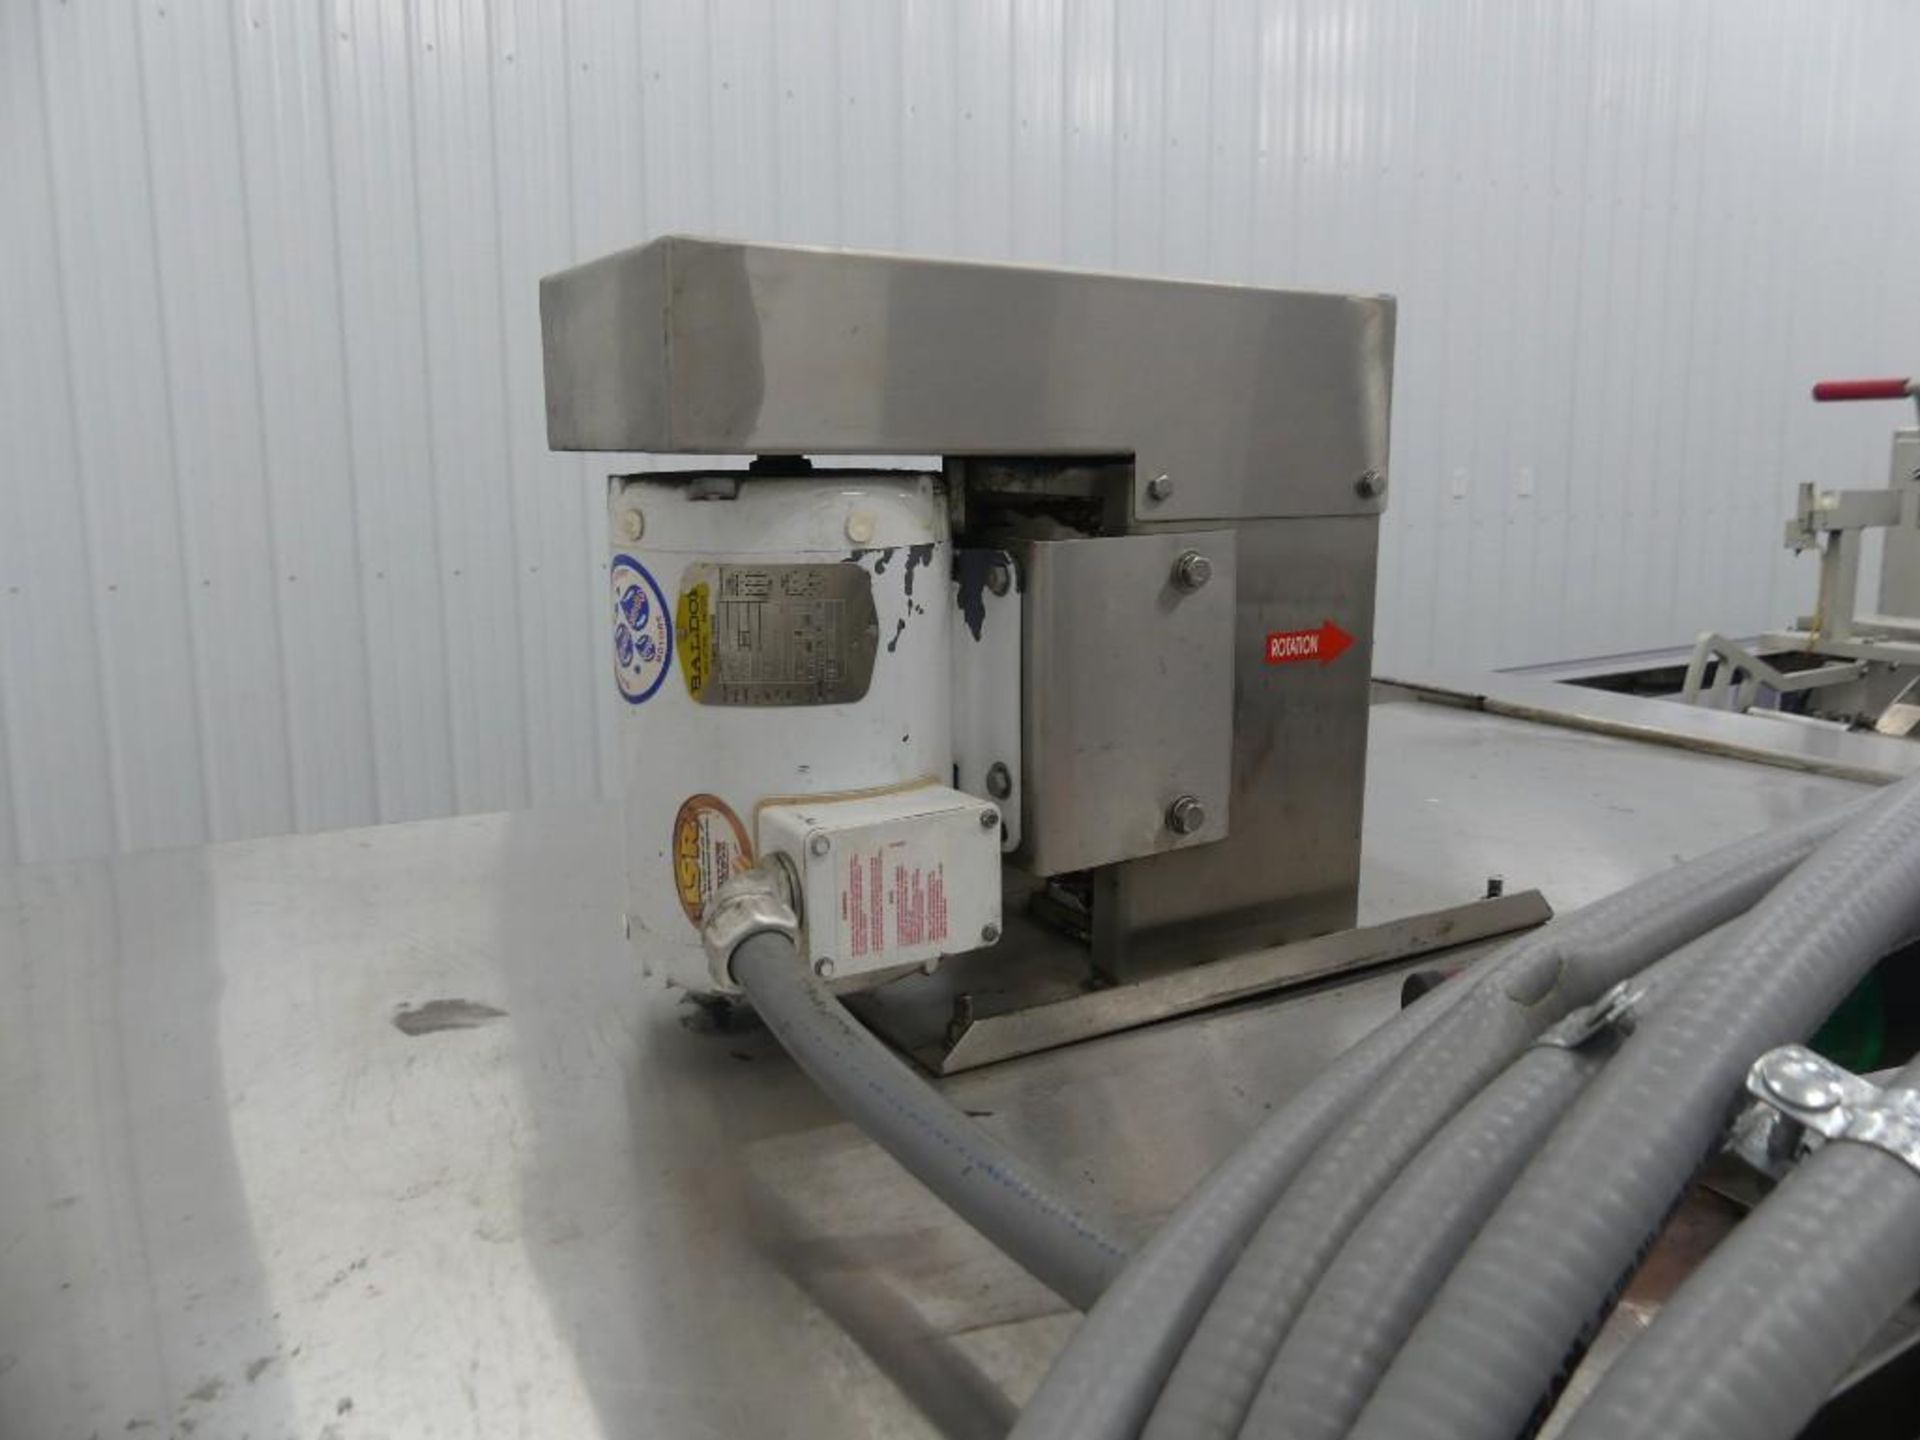 Arpac Delkor Spot-Pak 112-SS-24 Automatic Stainless Steel Shrink Bundler - Image 43 of 101